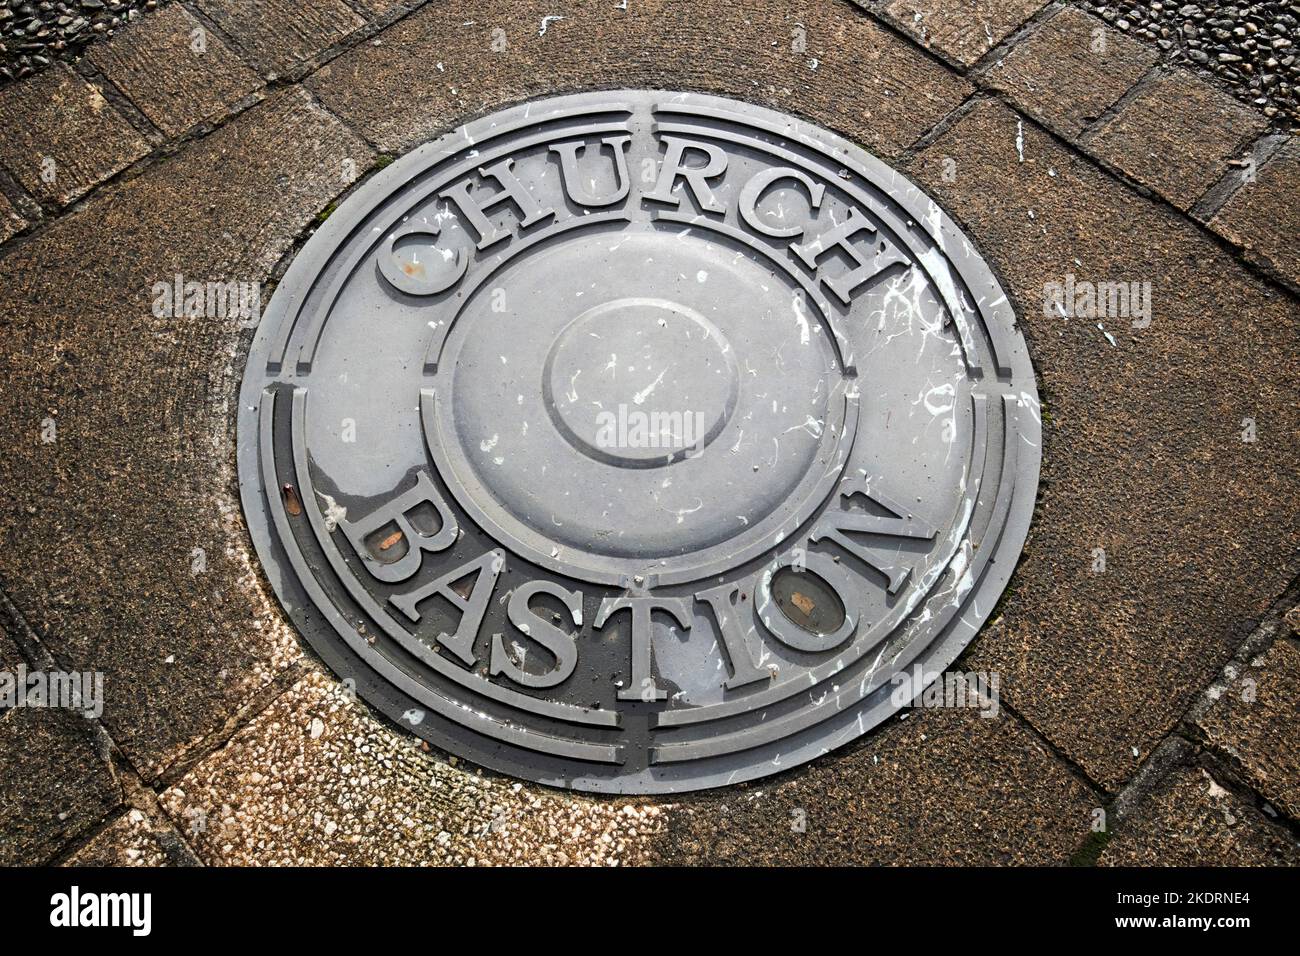 church bastion sign in the ground on derrys walls derry londonderry northern ireland uk Stock Photo